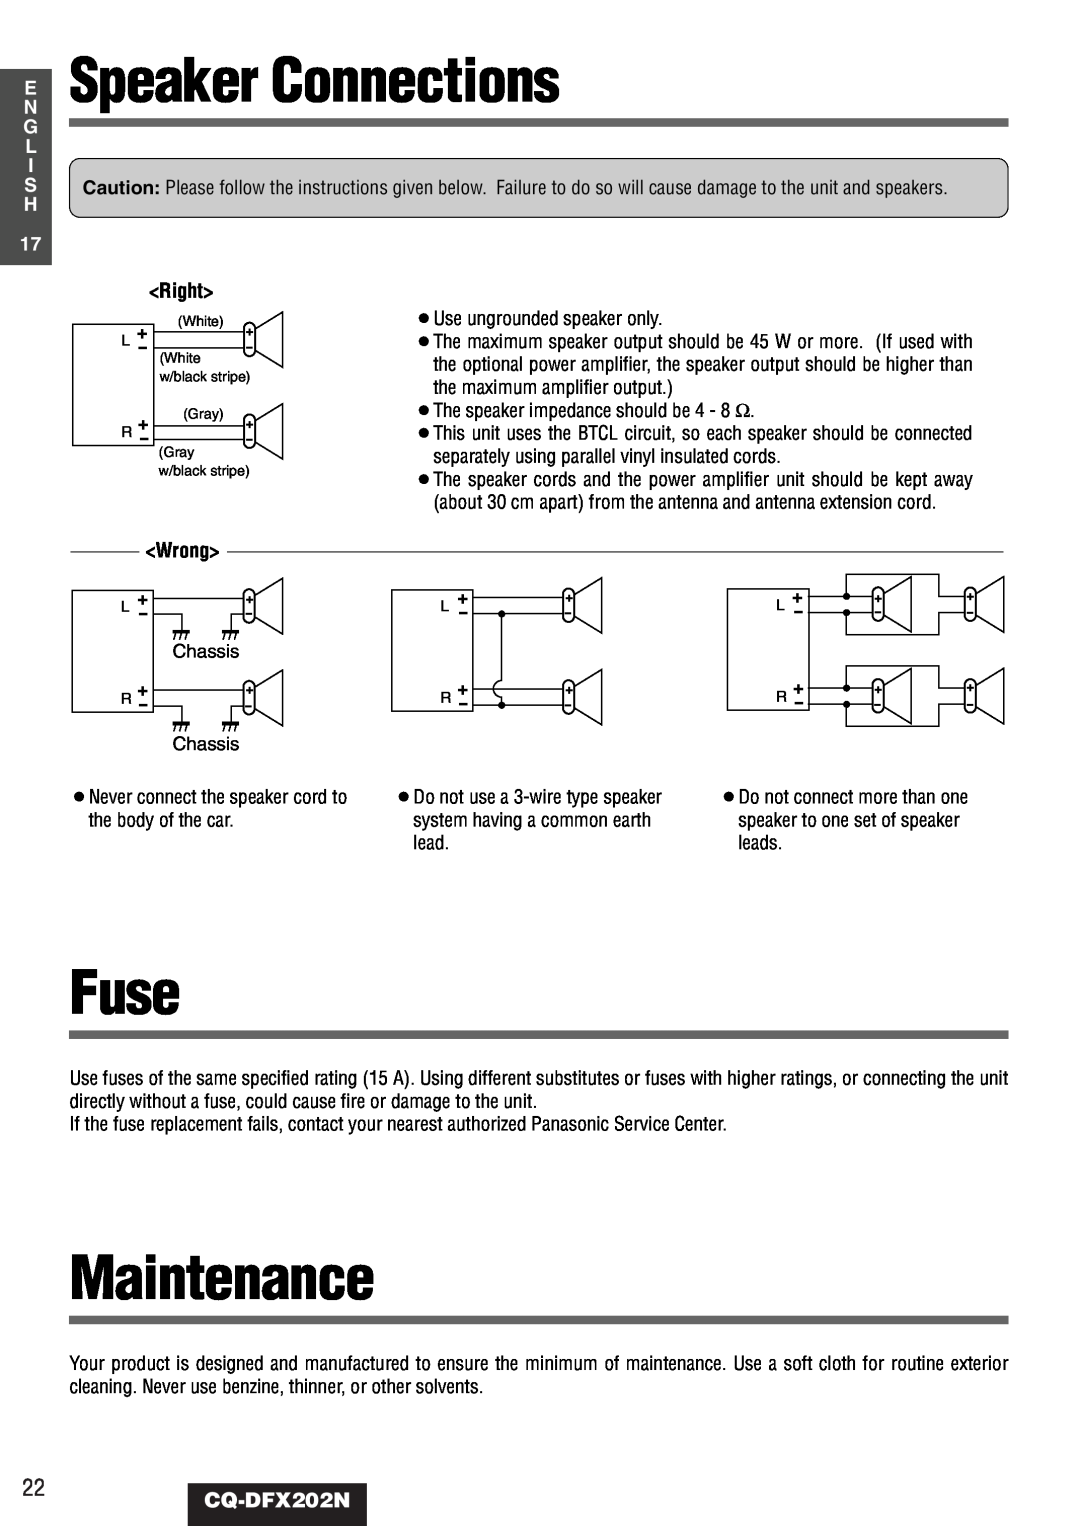 Panasonic CQ-DFX202N operating instructions Speaker Connections, Fuse, Maintenance, Wrong, E N G L I S H 